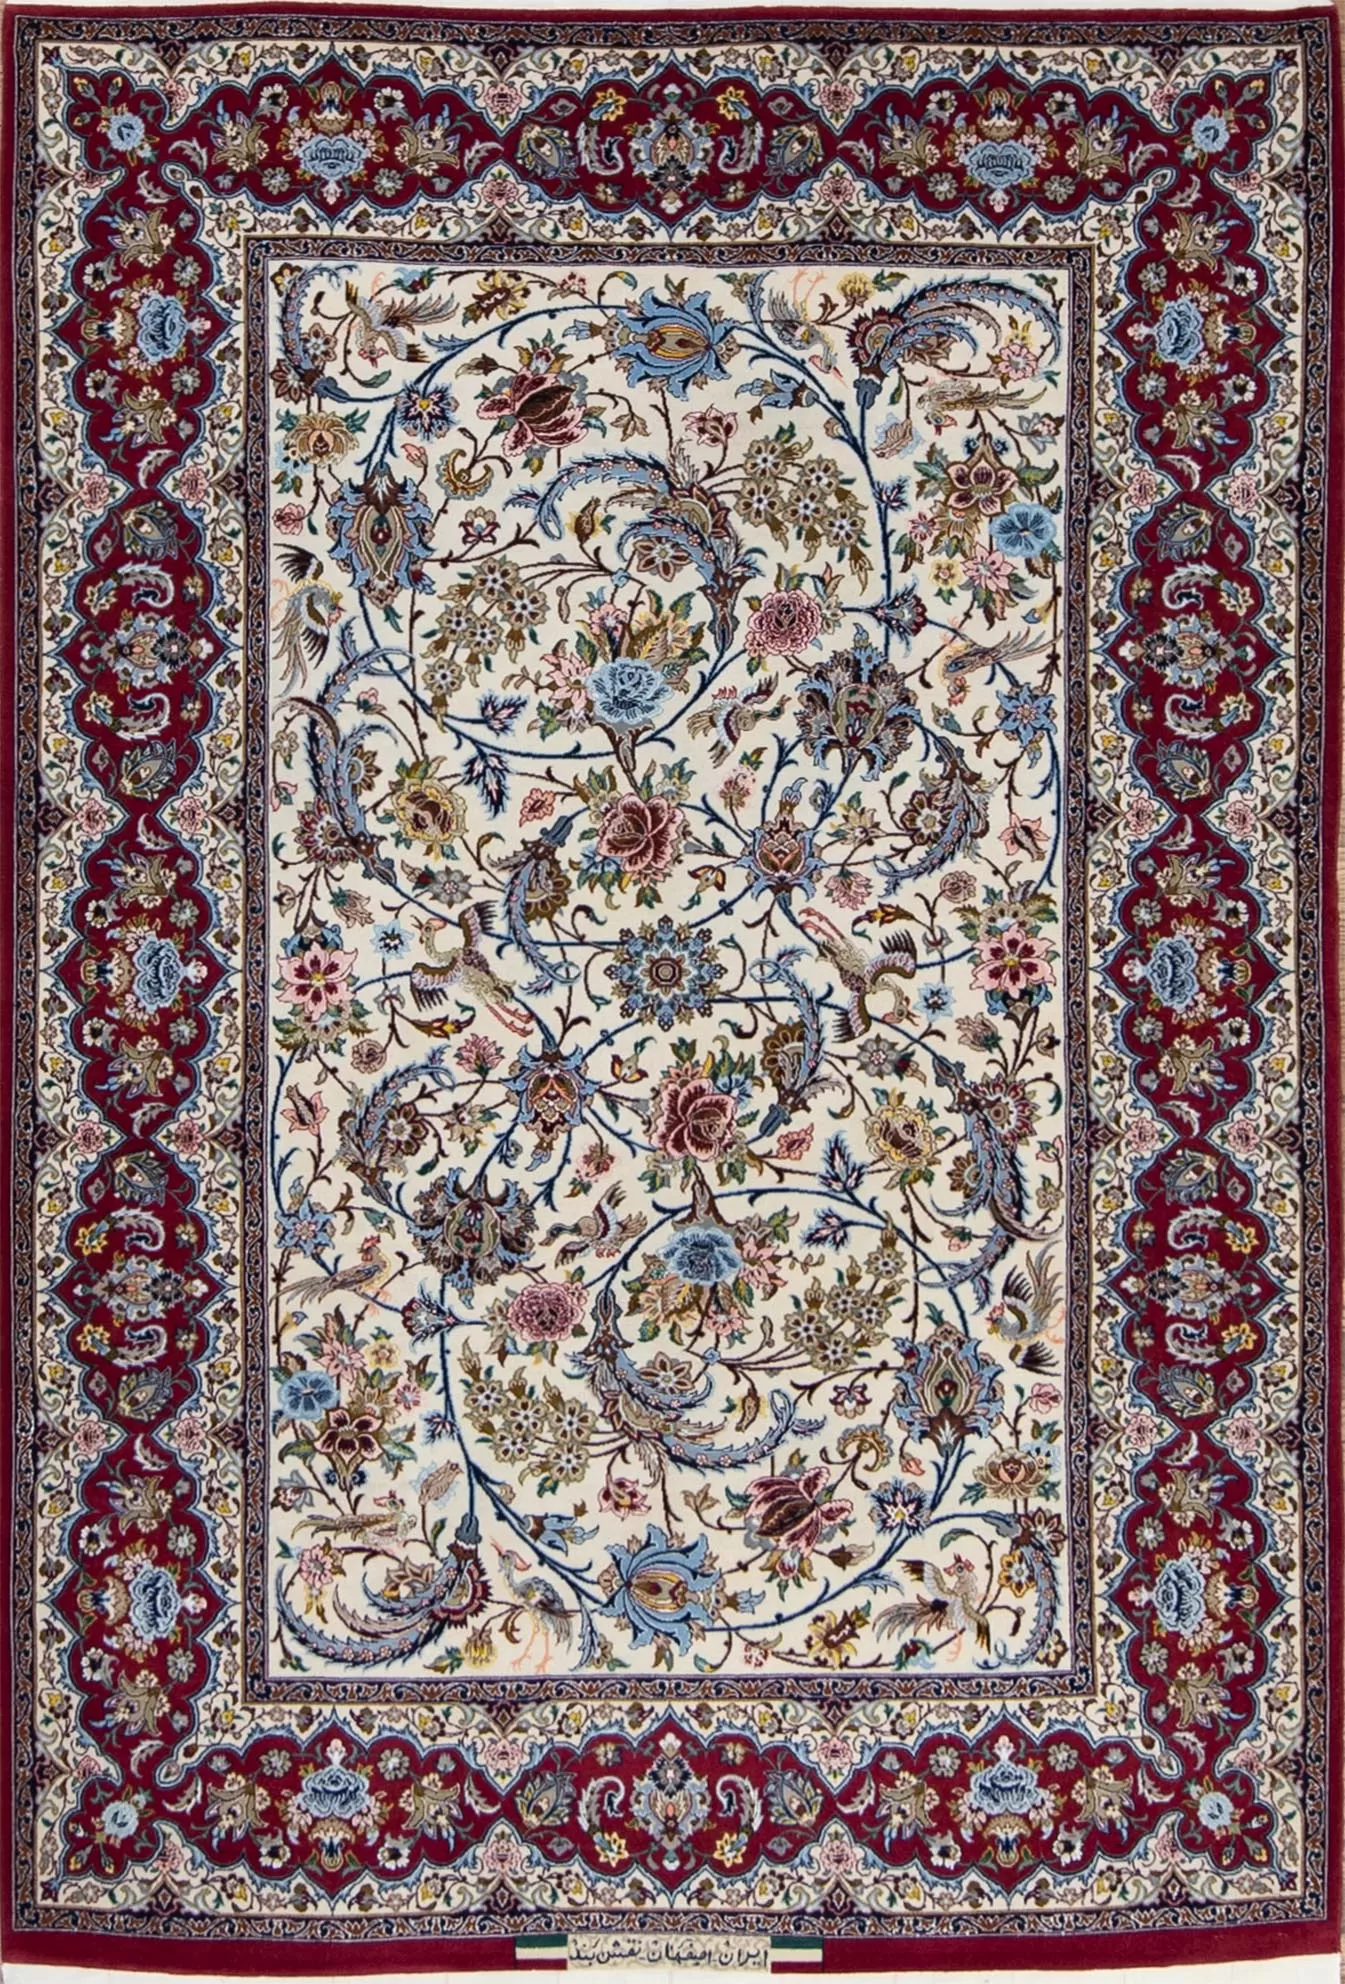 Best area rugs for living. Hand-woven Persian Isfahan floral rug with beige and burgundy red colors. Size 4.8x7.